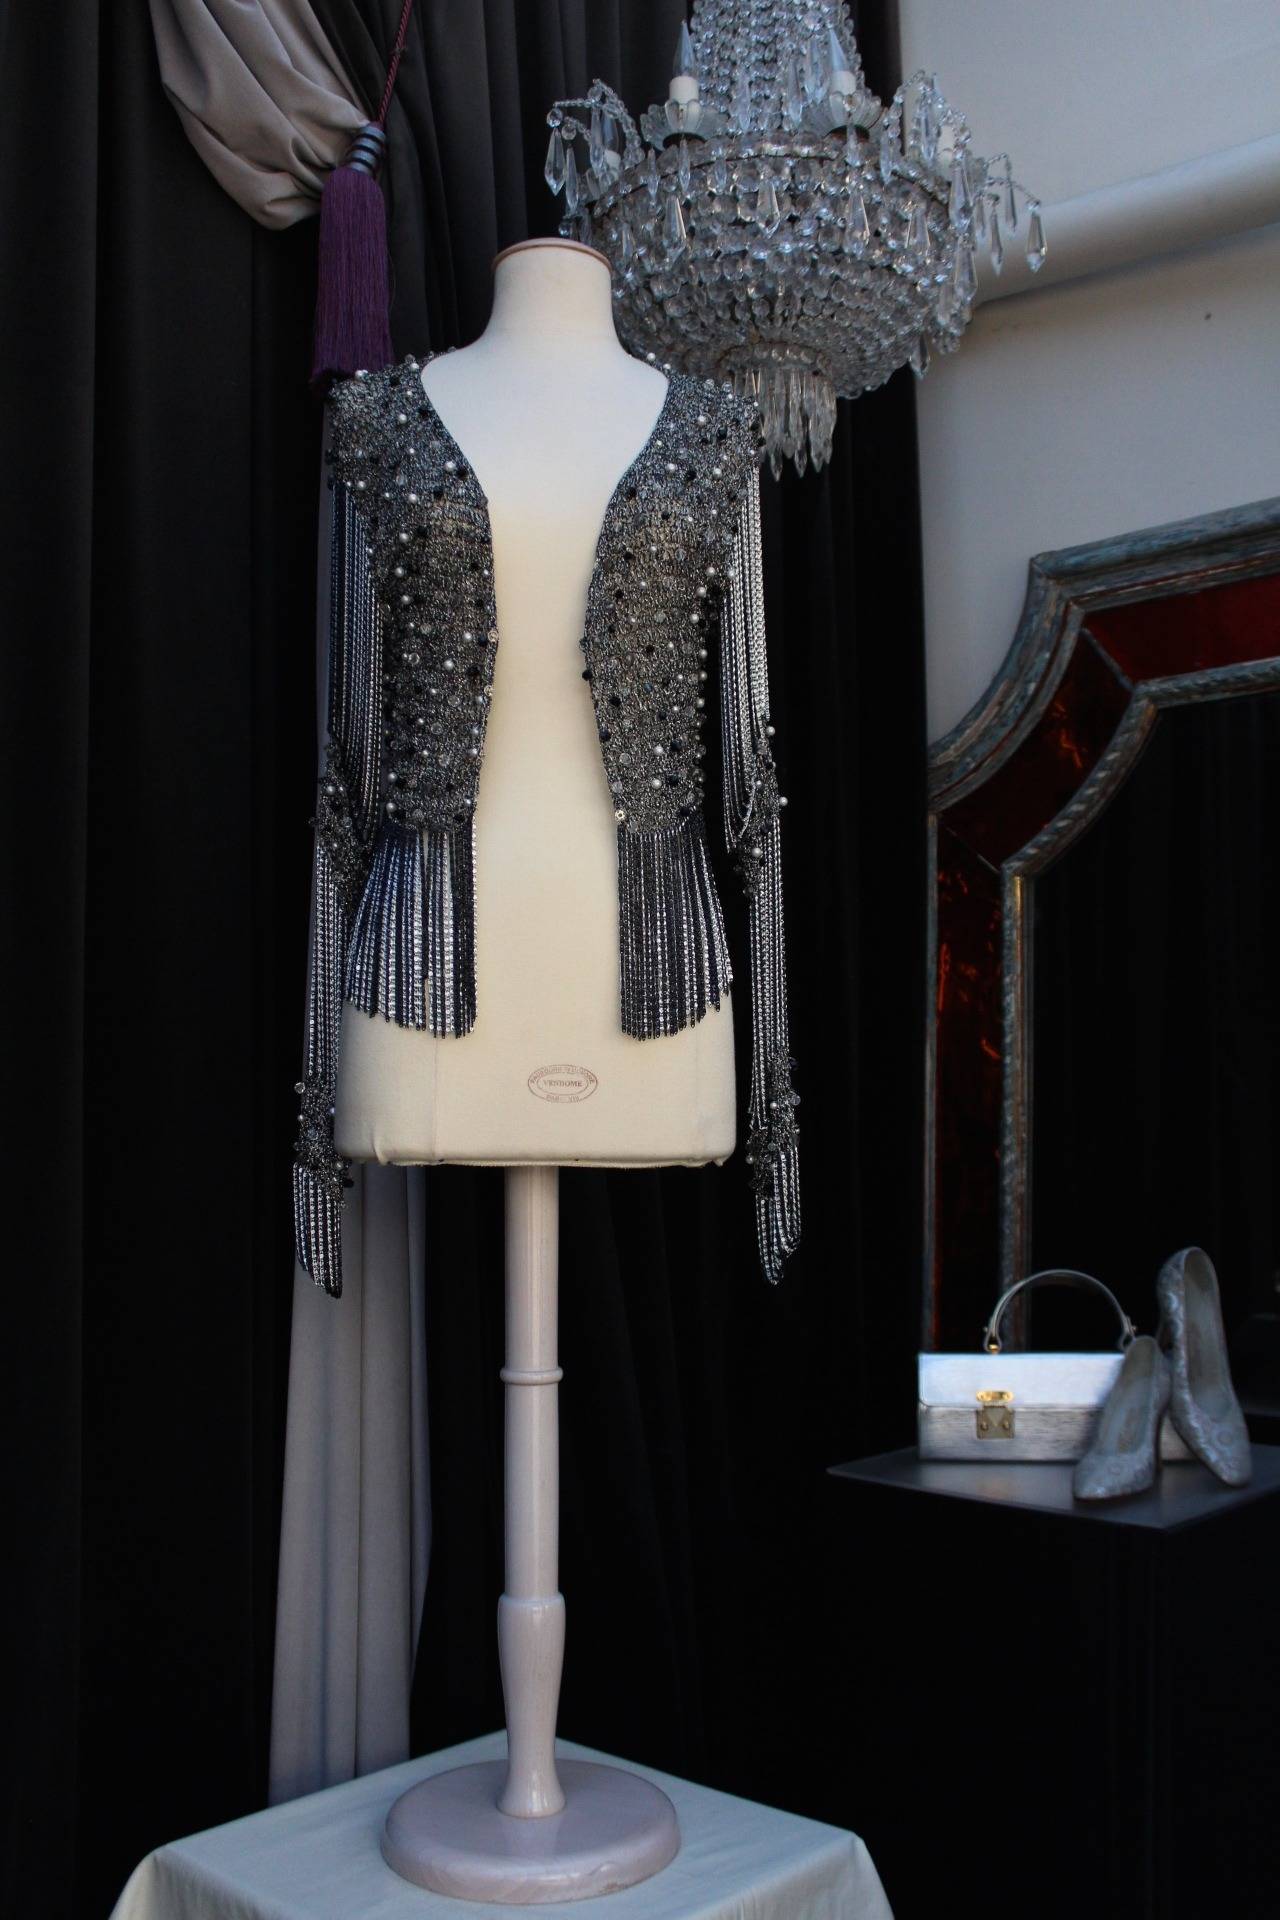 Stunning and Sexy Loris Azzaro handmade crop cardigan composed of black grey lurex embellished with pearlescent white and black beads as well as black and metallic fringing chains on the waist. 

The cardigan consists of long sleeves featuring the